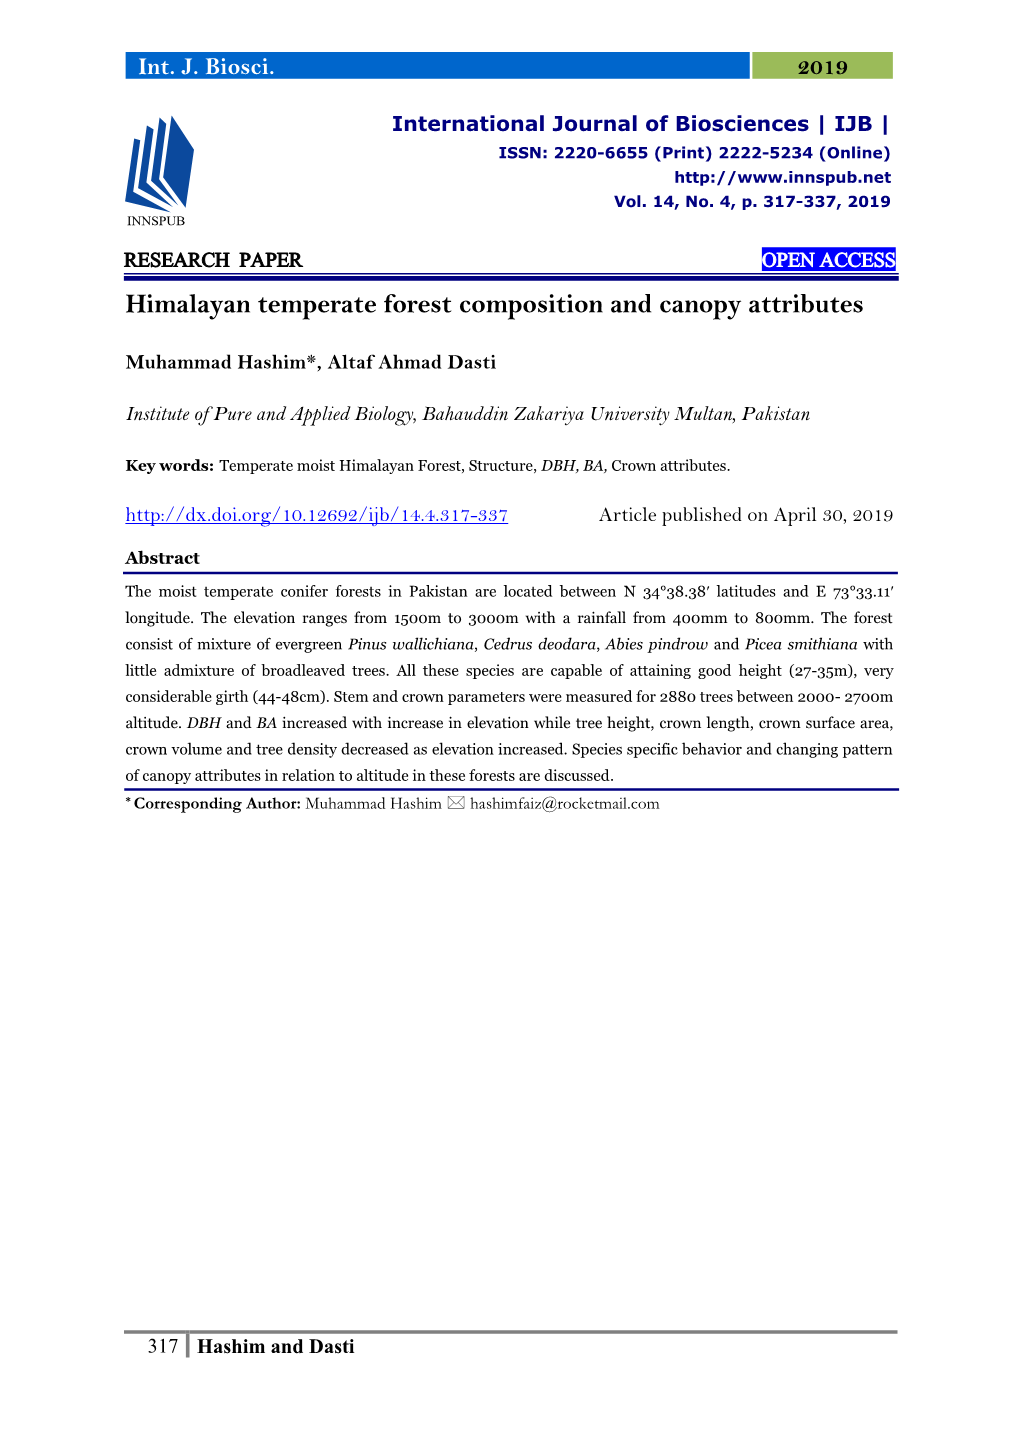 Himalayan Temperate Forest Composition and Canopy Attributes